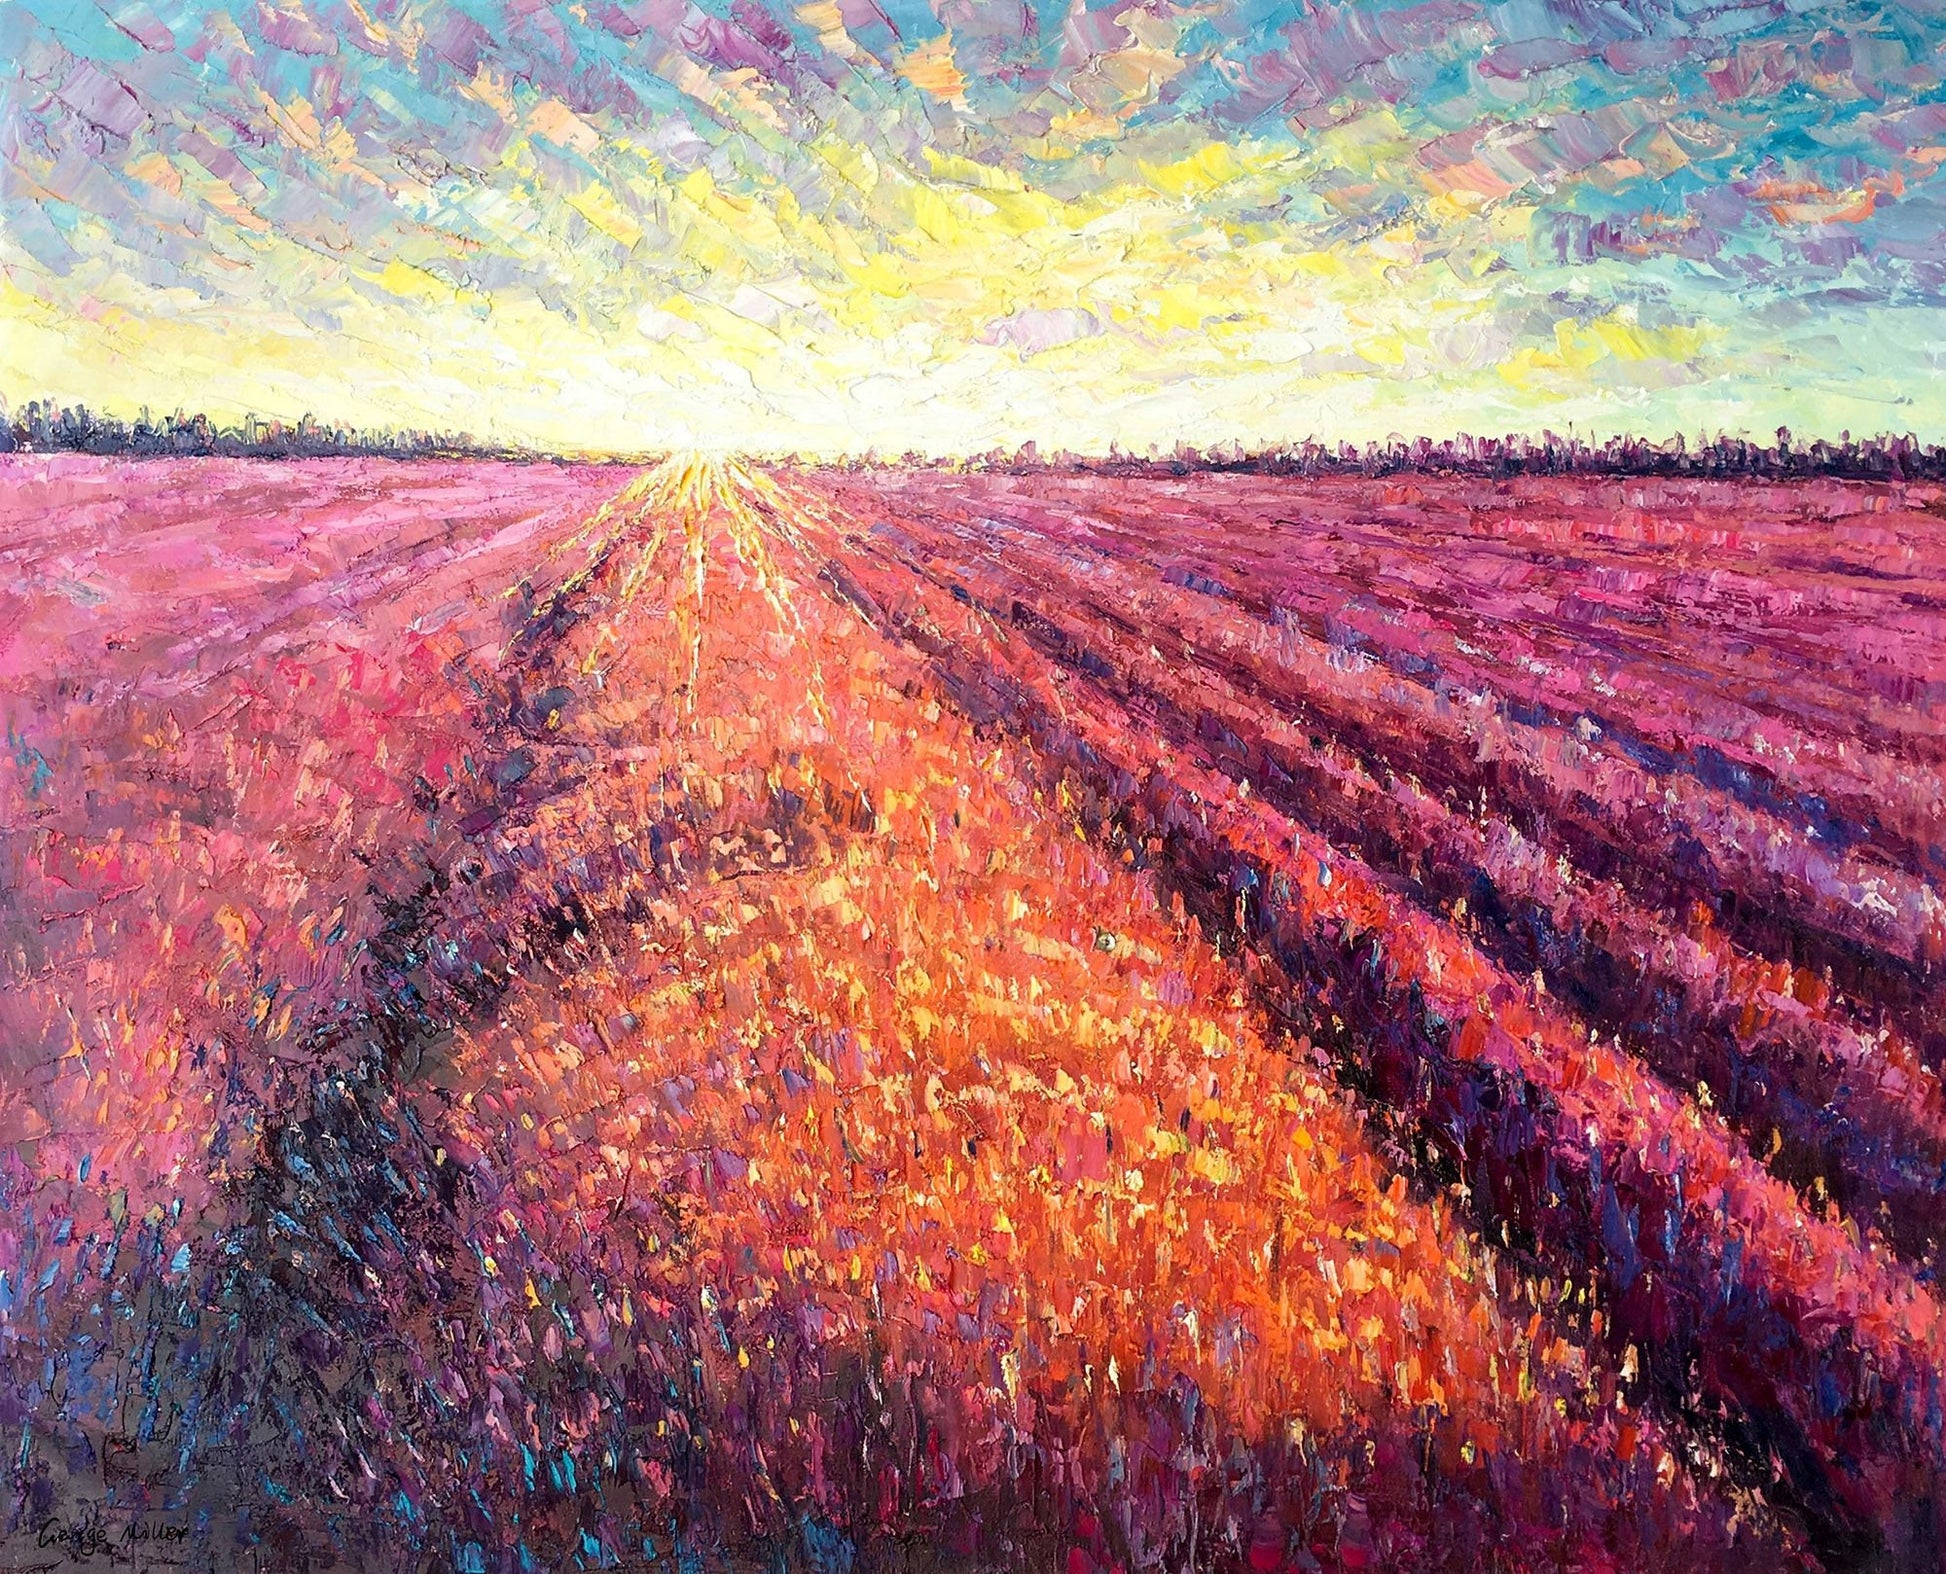 Landscape Oil Painting French Provence Lavender Fields At Dawn, Canvas Art, Paintings On Canvas, Abstract Landscape, Large Wall Art